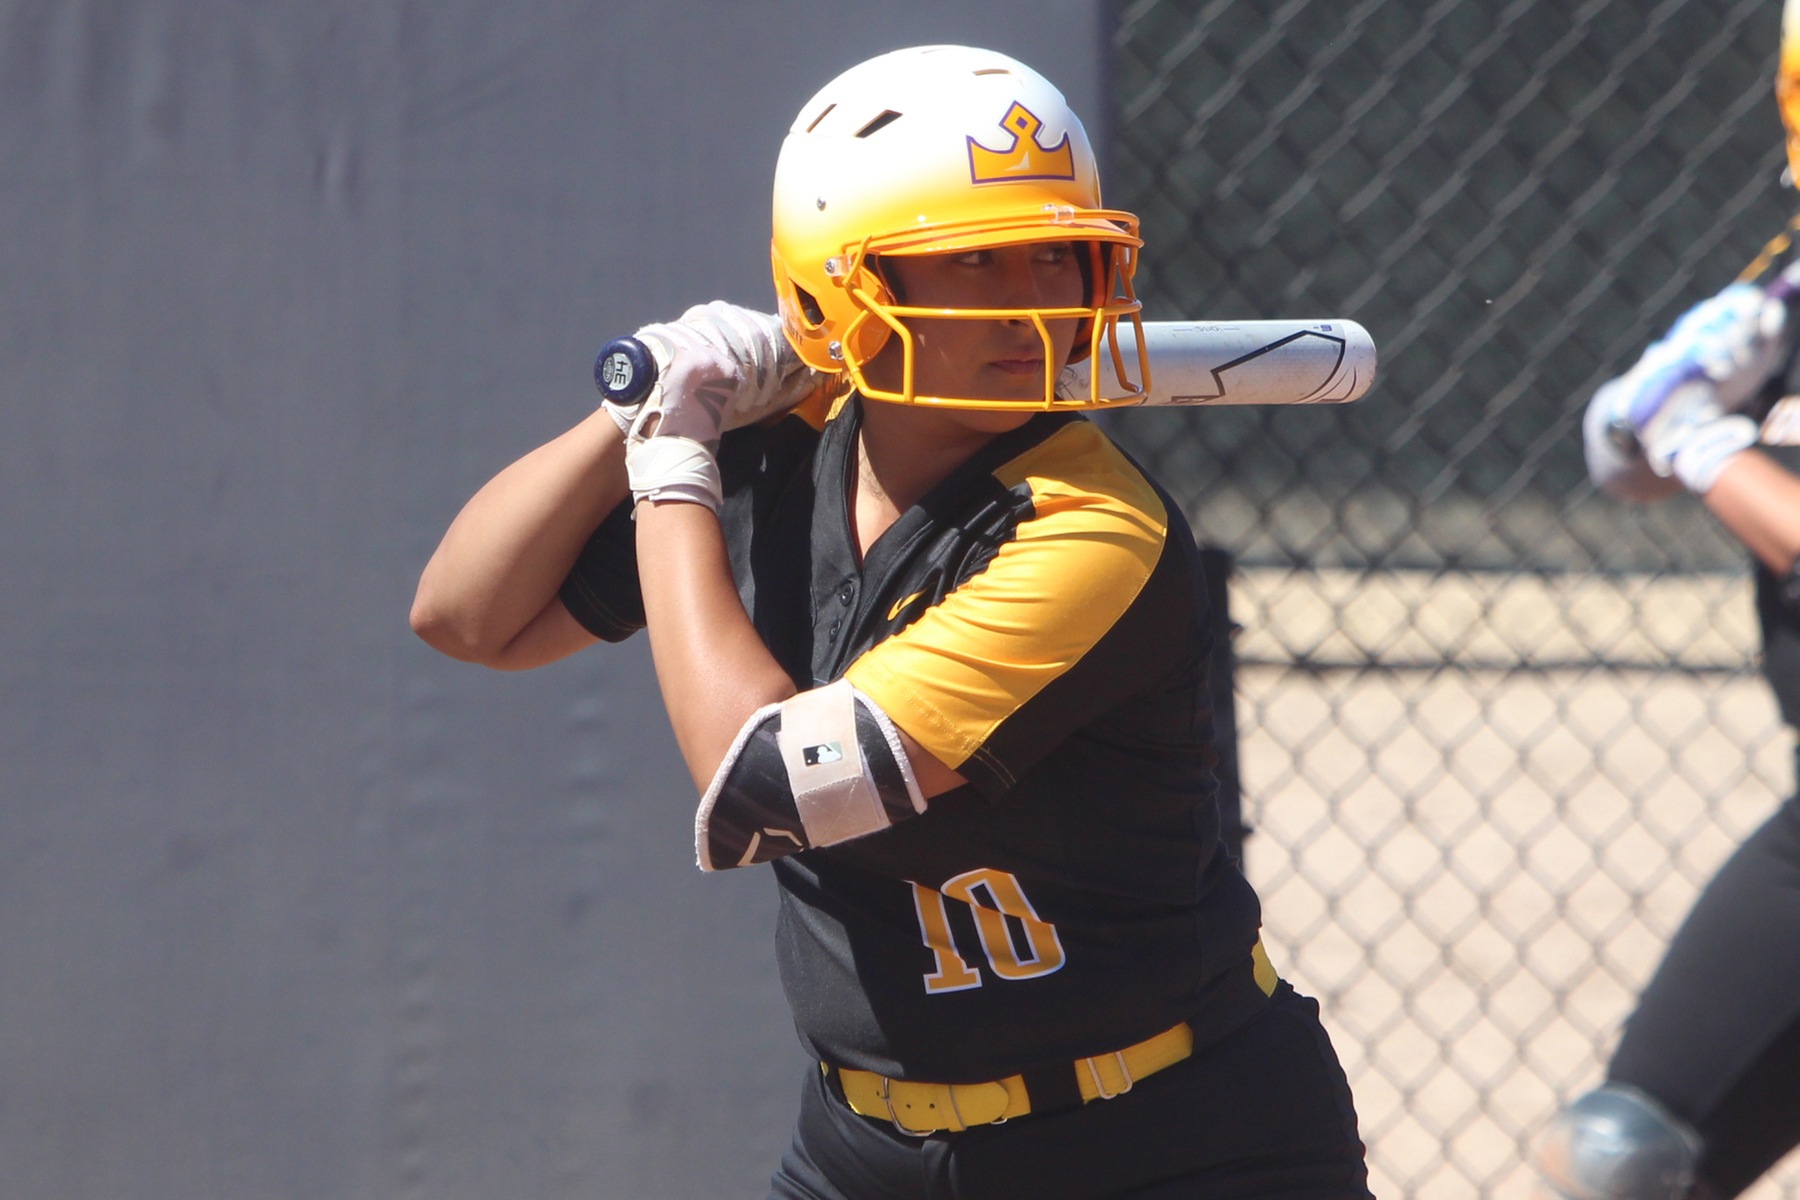 Celeste Ekman recorded 2 RBI during the first game of a doubleheader with La Verne.